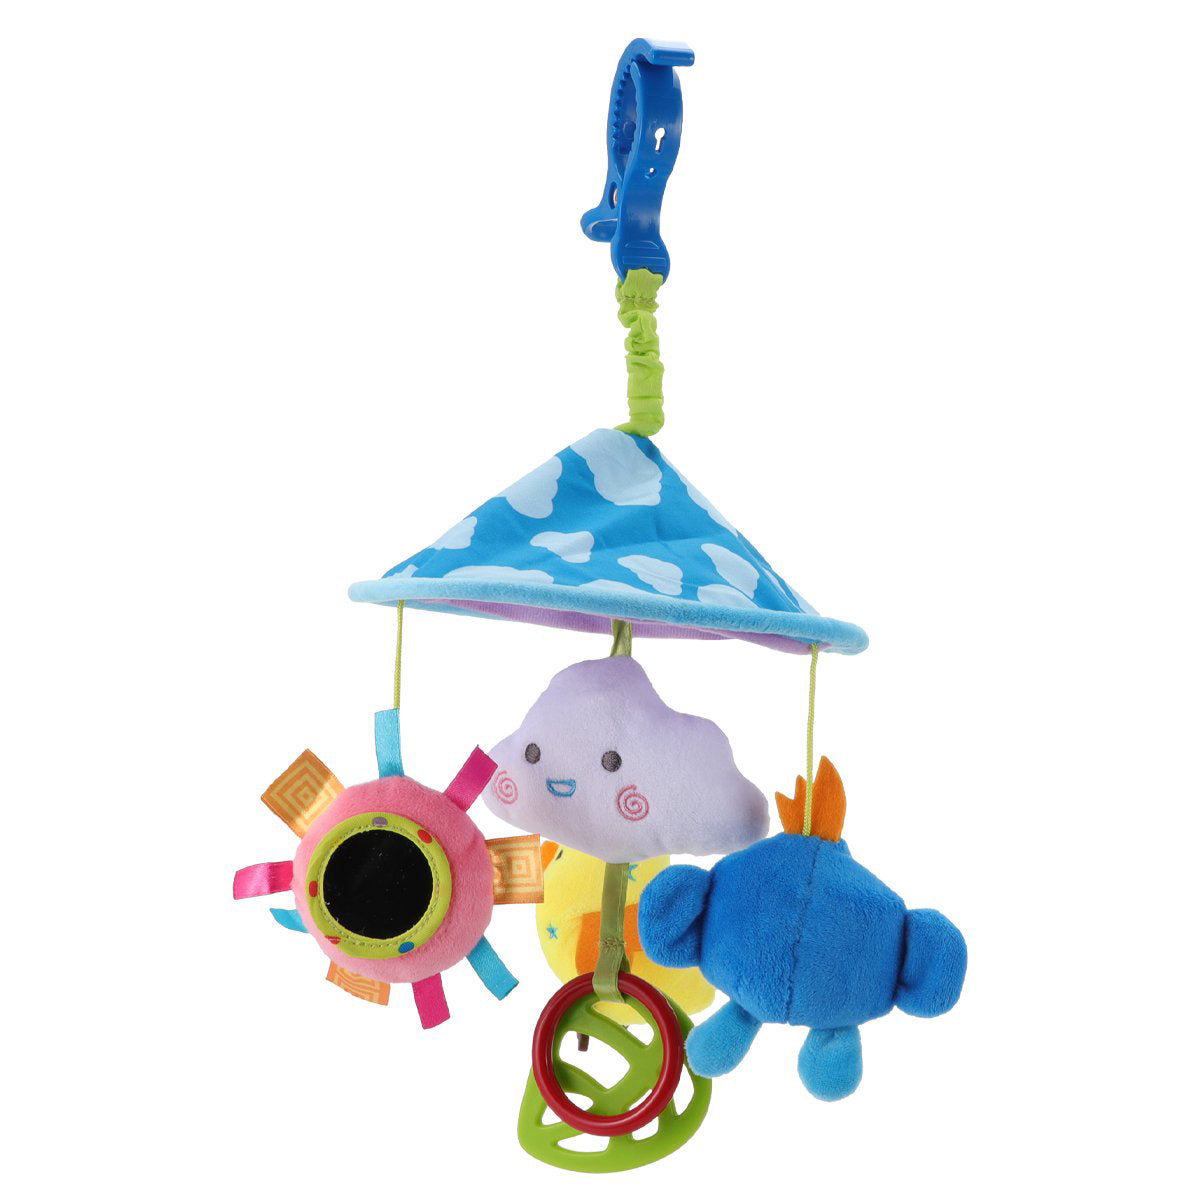 Bird In The Sky Bed Hanging Rattle Toy Rotating Cot Mobile - Blue